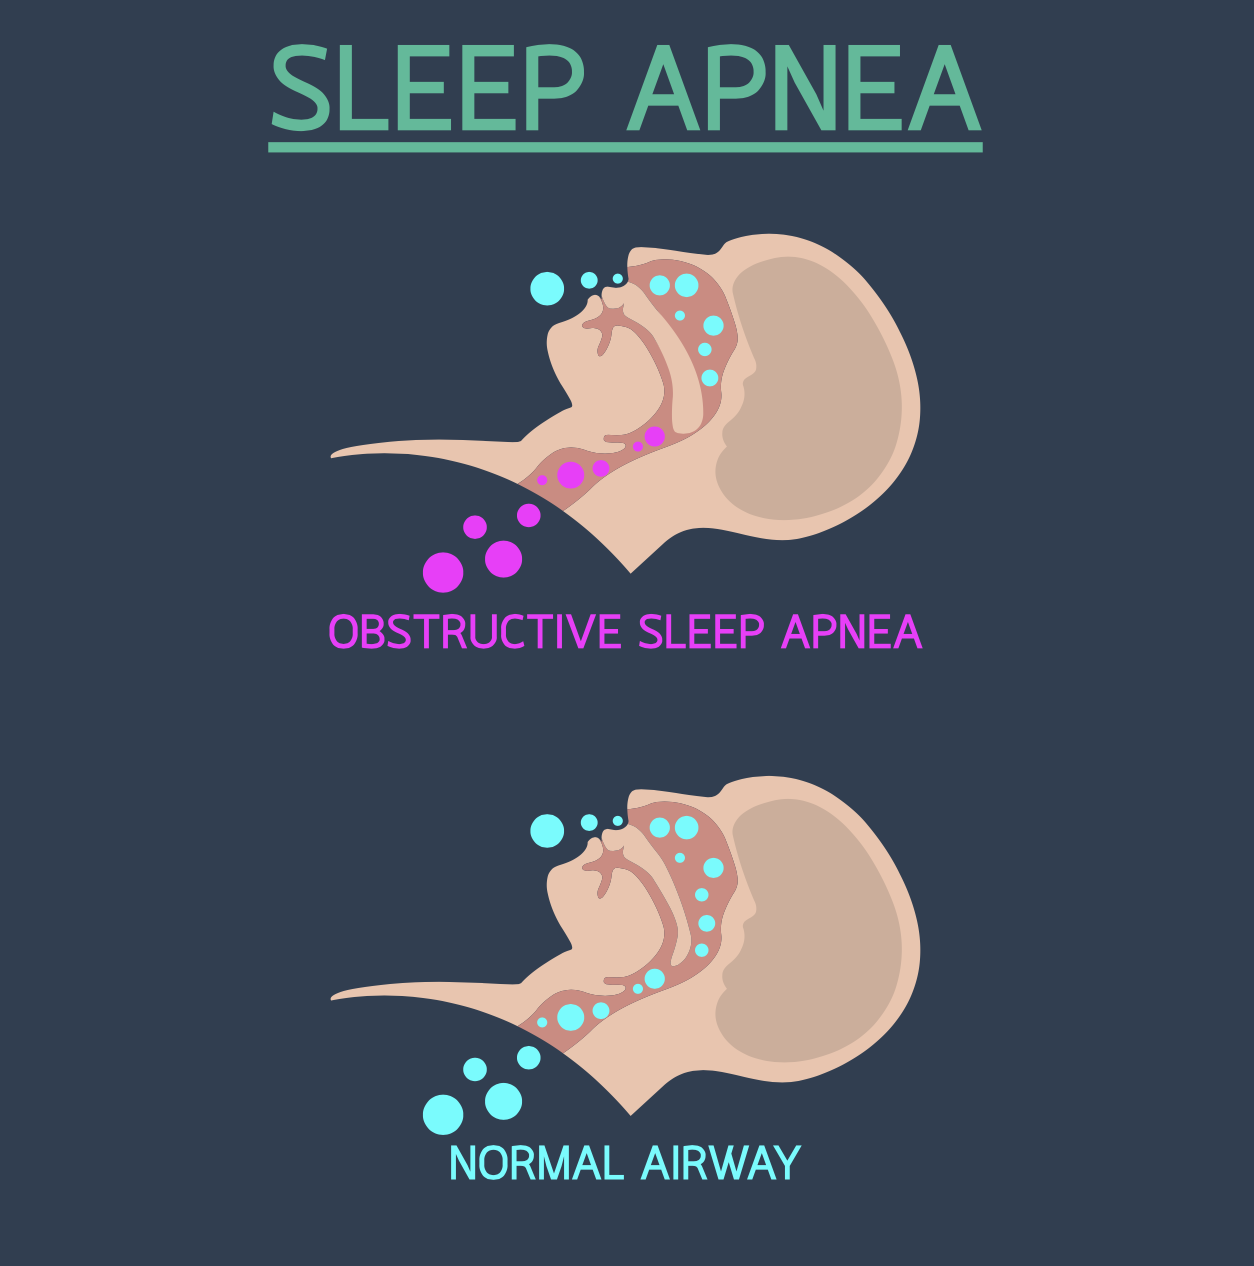 illustration showing the difference between the normal airway and one caused by obstructive sleep apnea and health